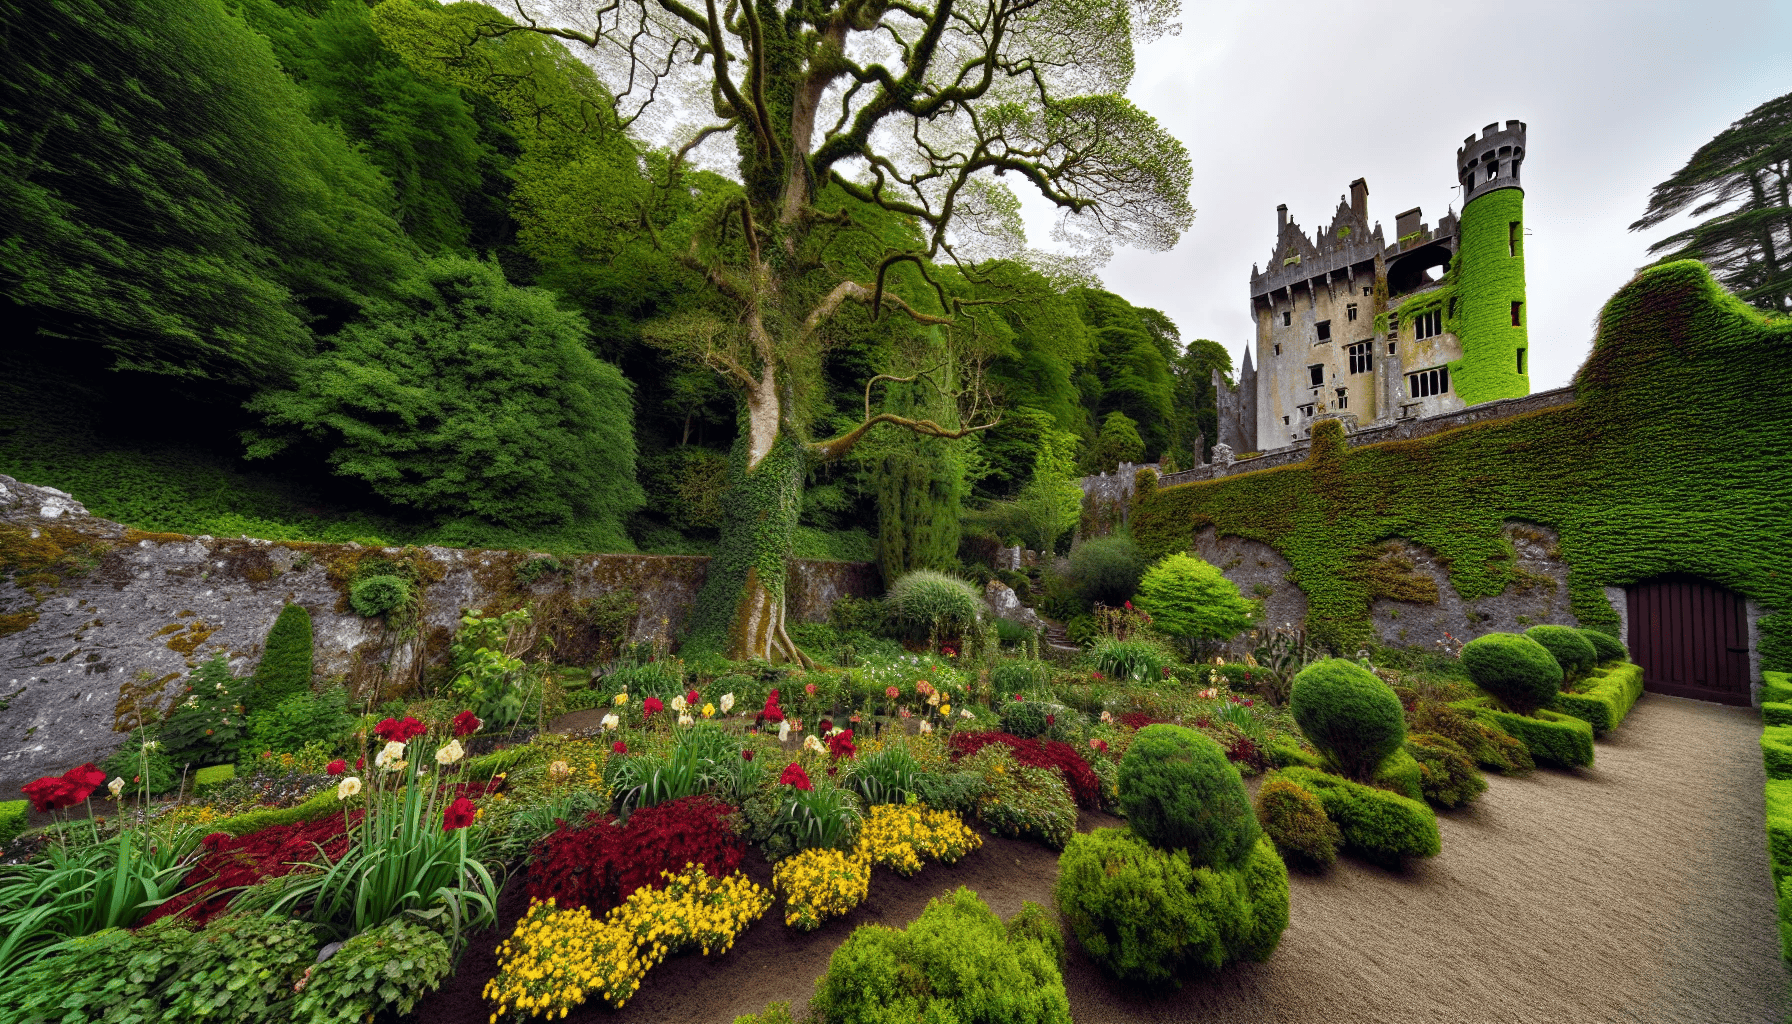 Enchanting gardens and ancient stone walls of Blarney Castle